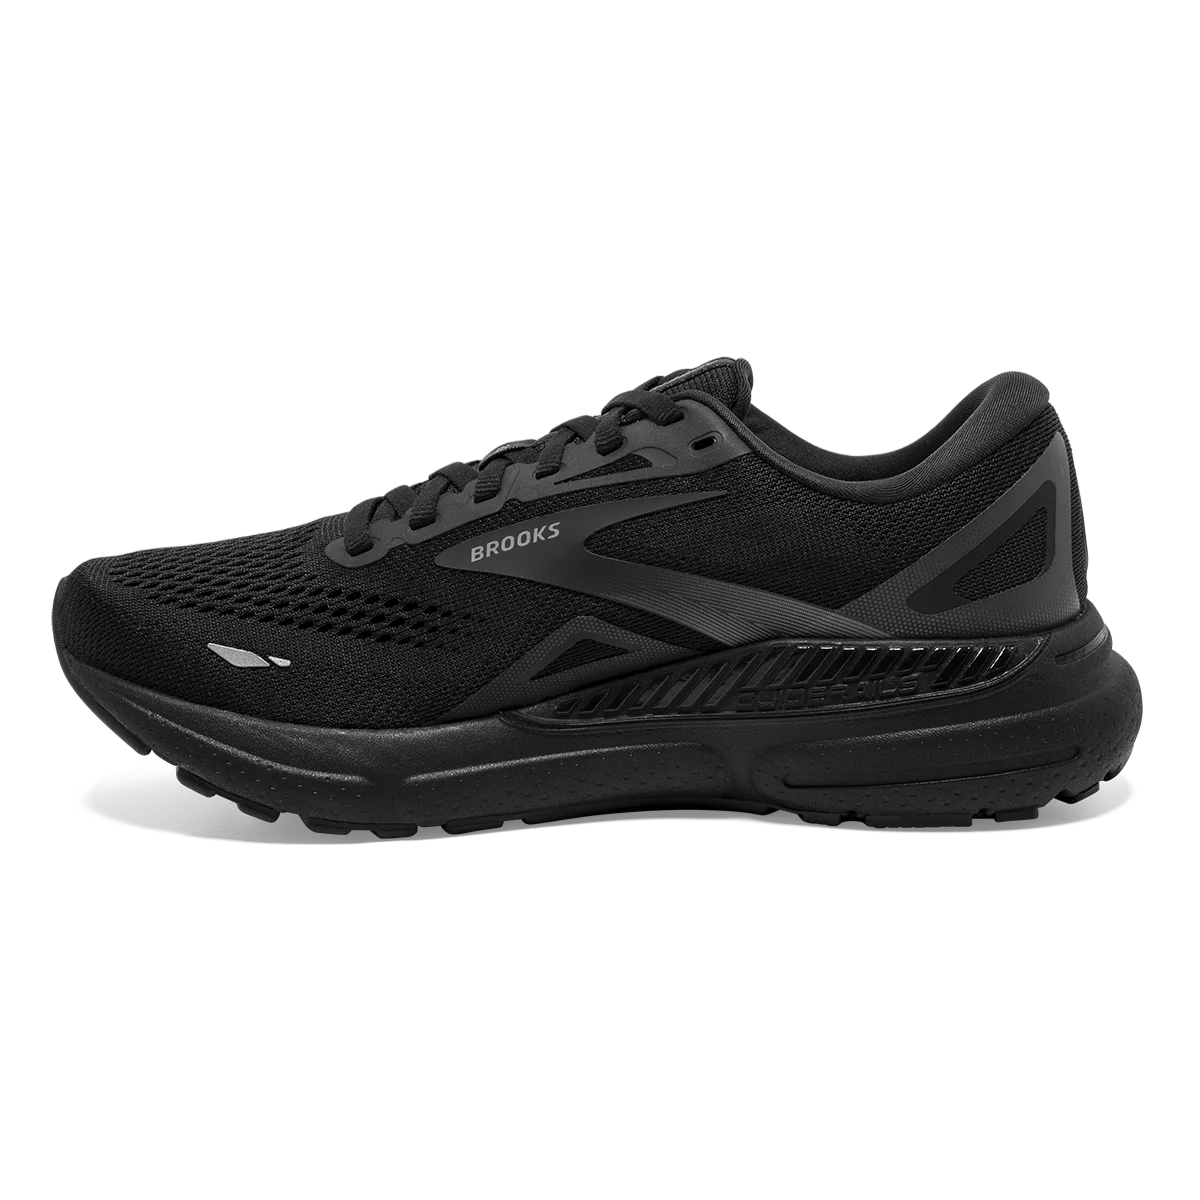 Medial view of the Women's Adrenaline GTS 23 in the wide 2E width, color Black/Black/Ebony